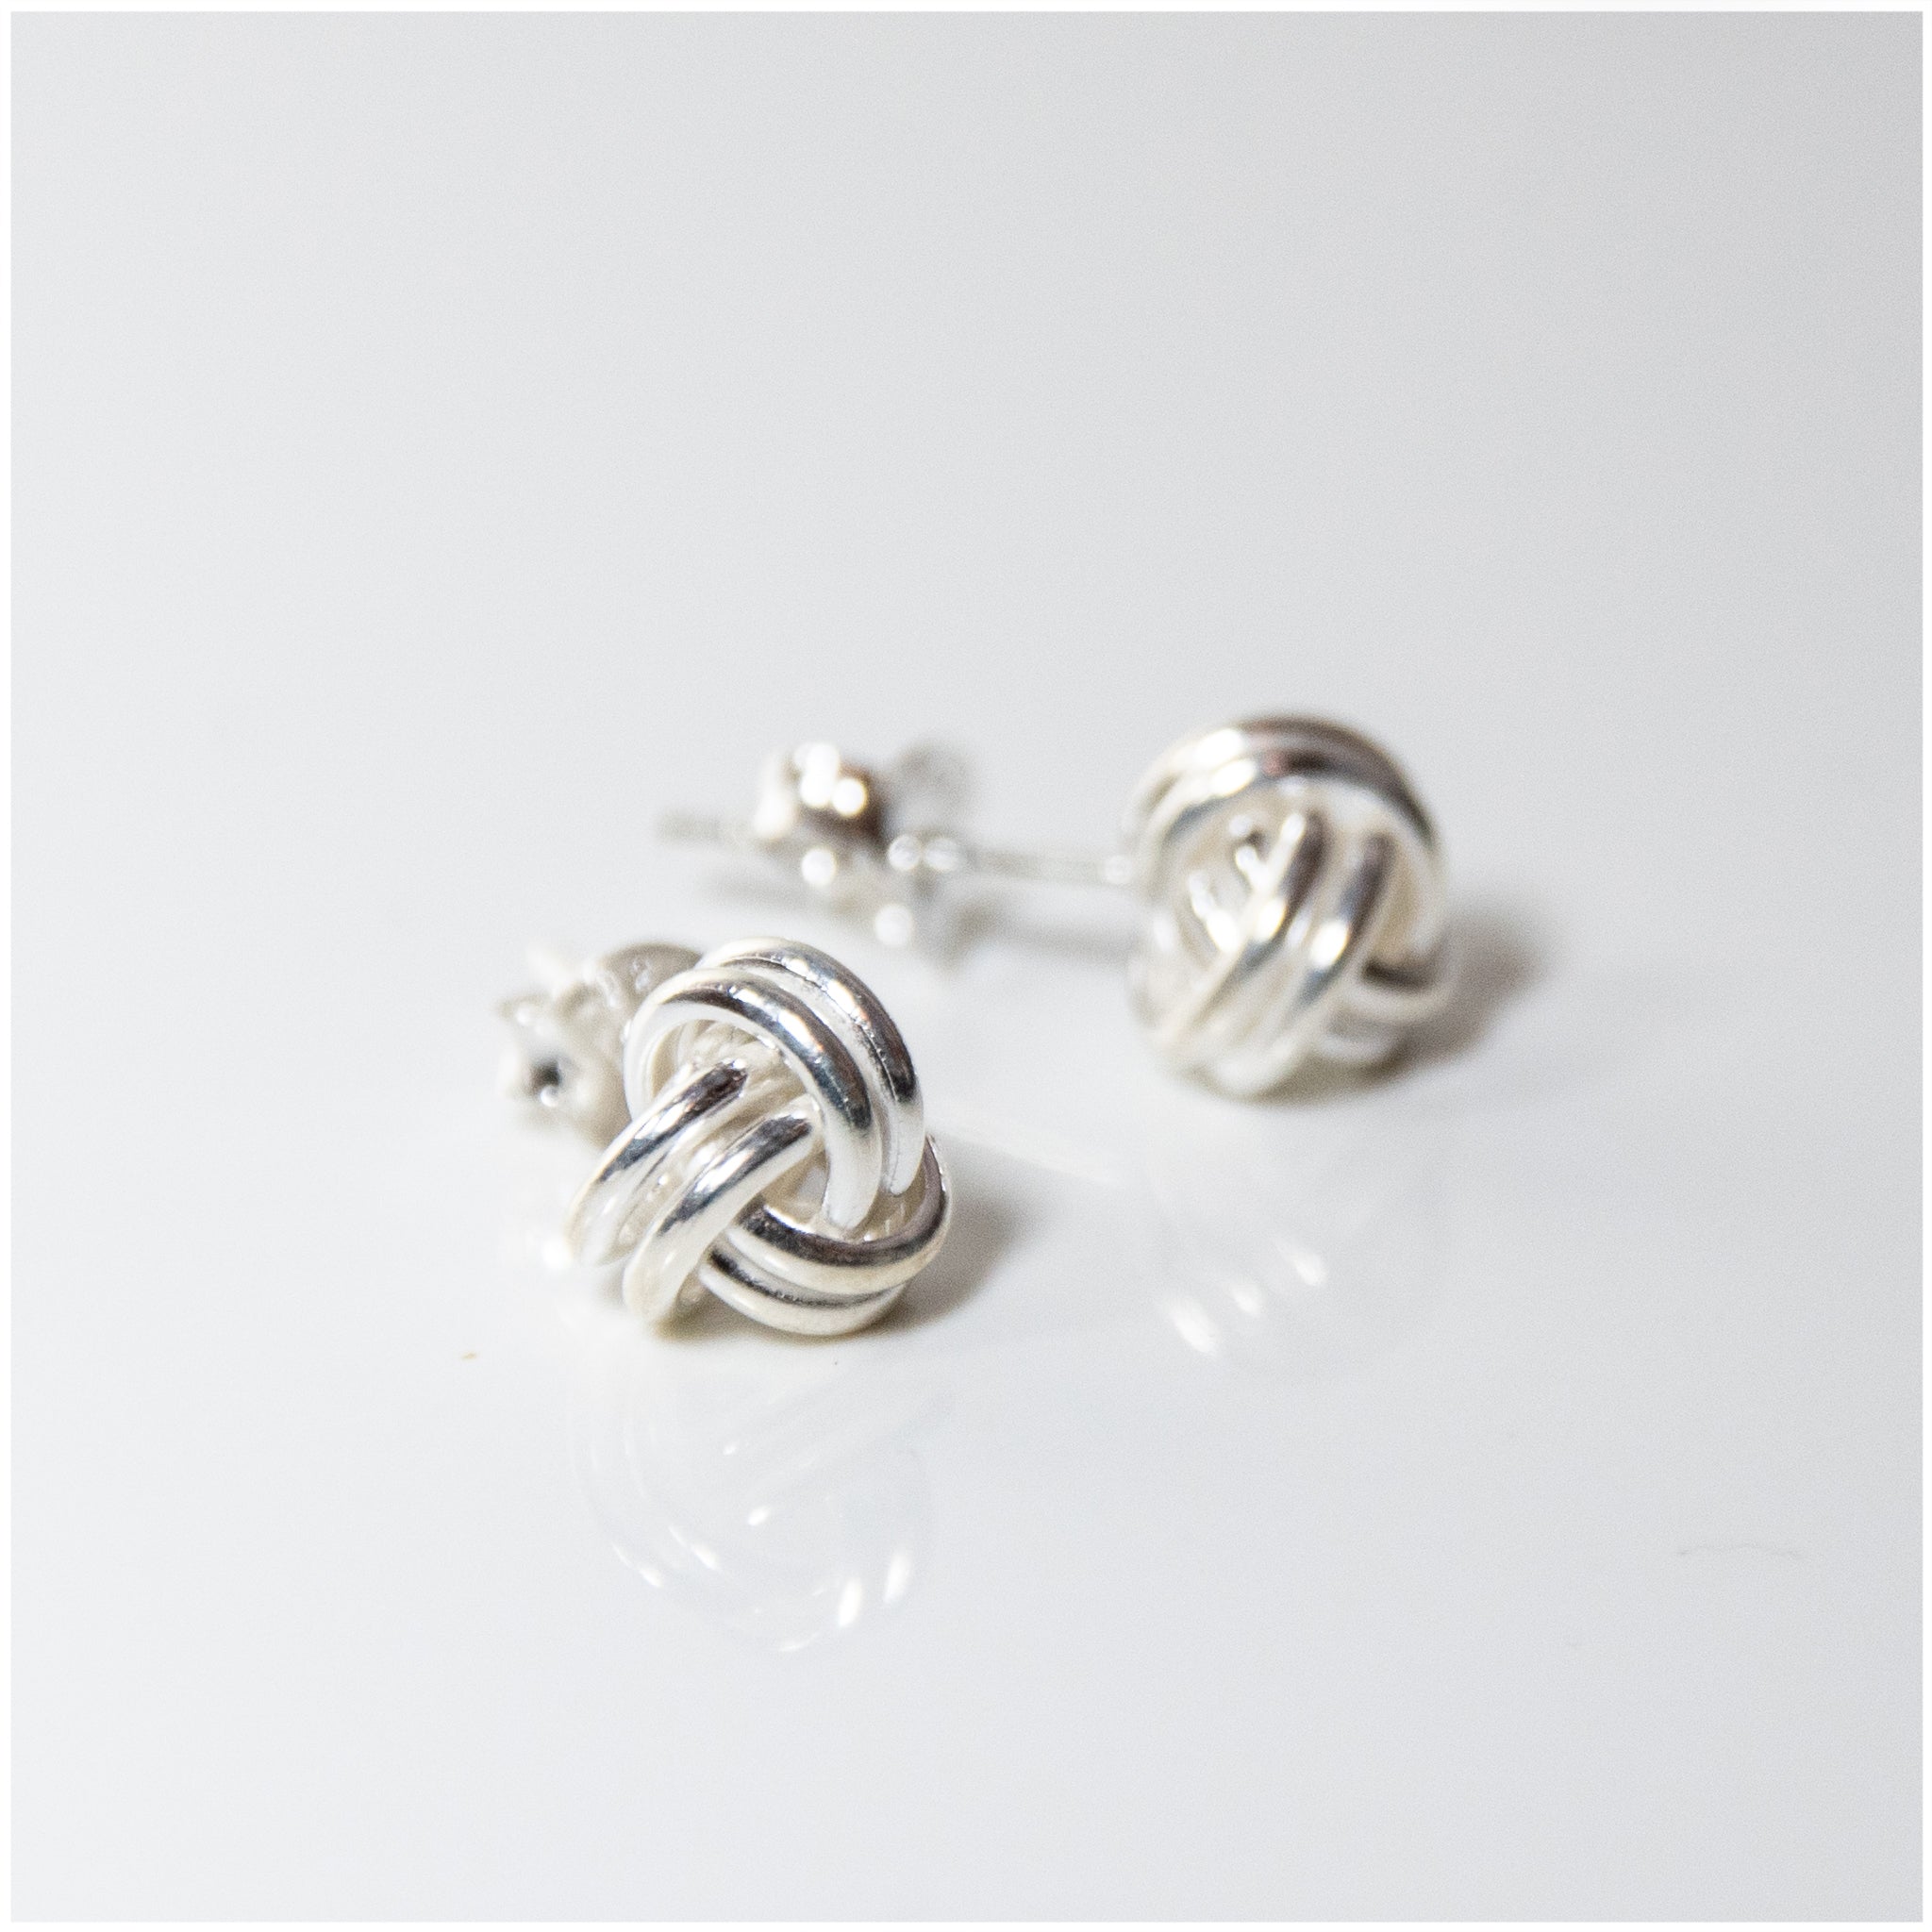 ES020 - Sterling Silver Knotted Earrings